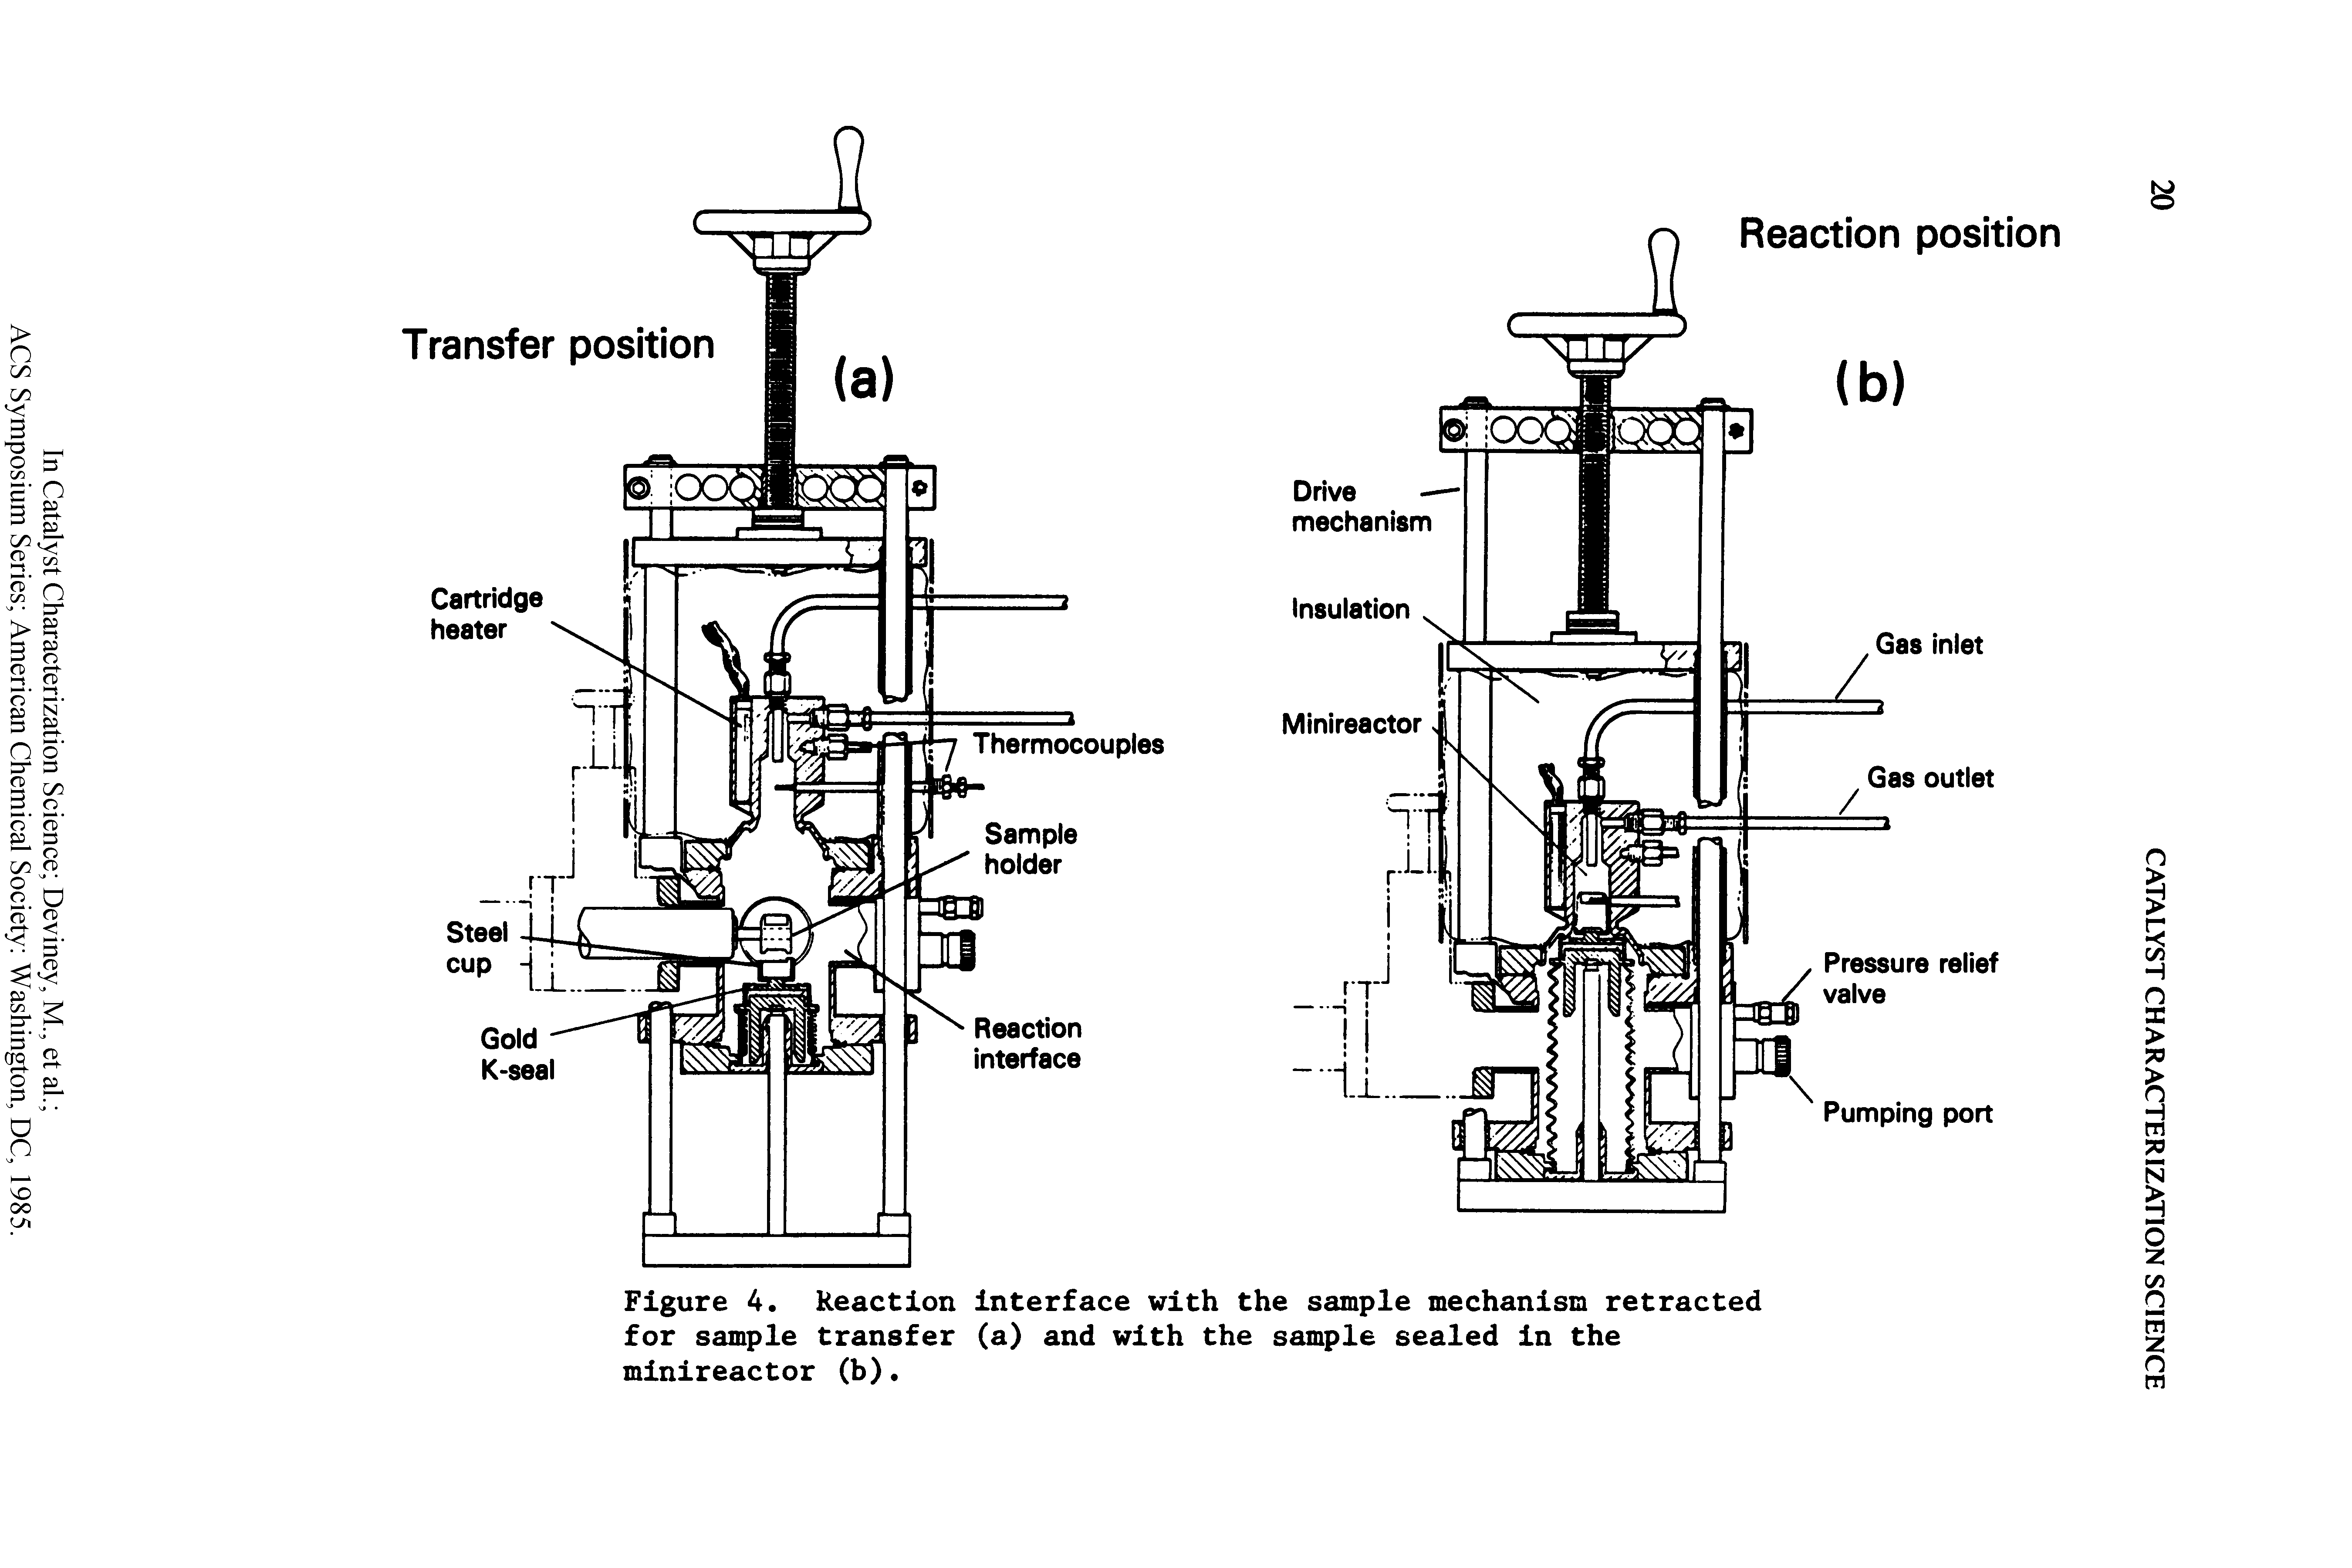 Figure 4. Reaction interface with the sample mechanism retracted for sample transfer (a) and with the sample sealed in the minireactor (b).